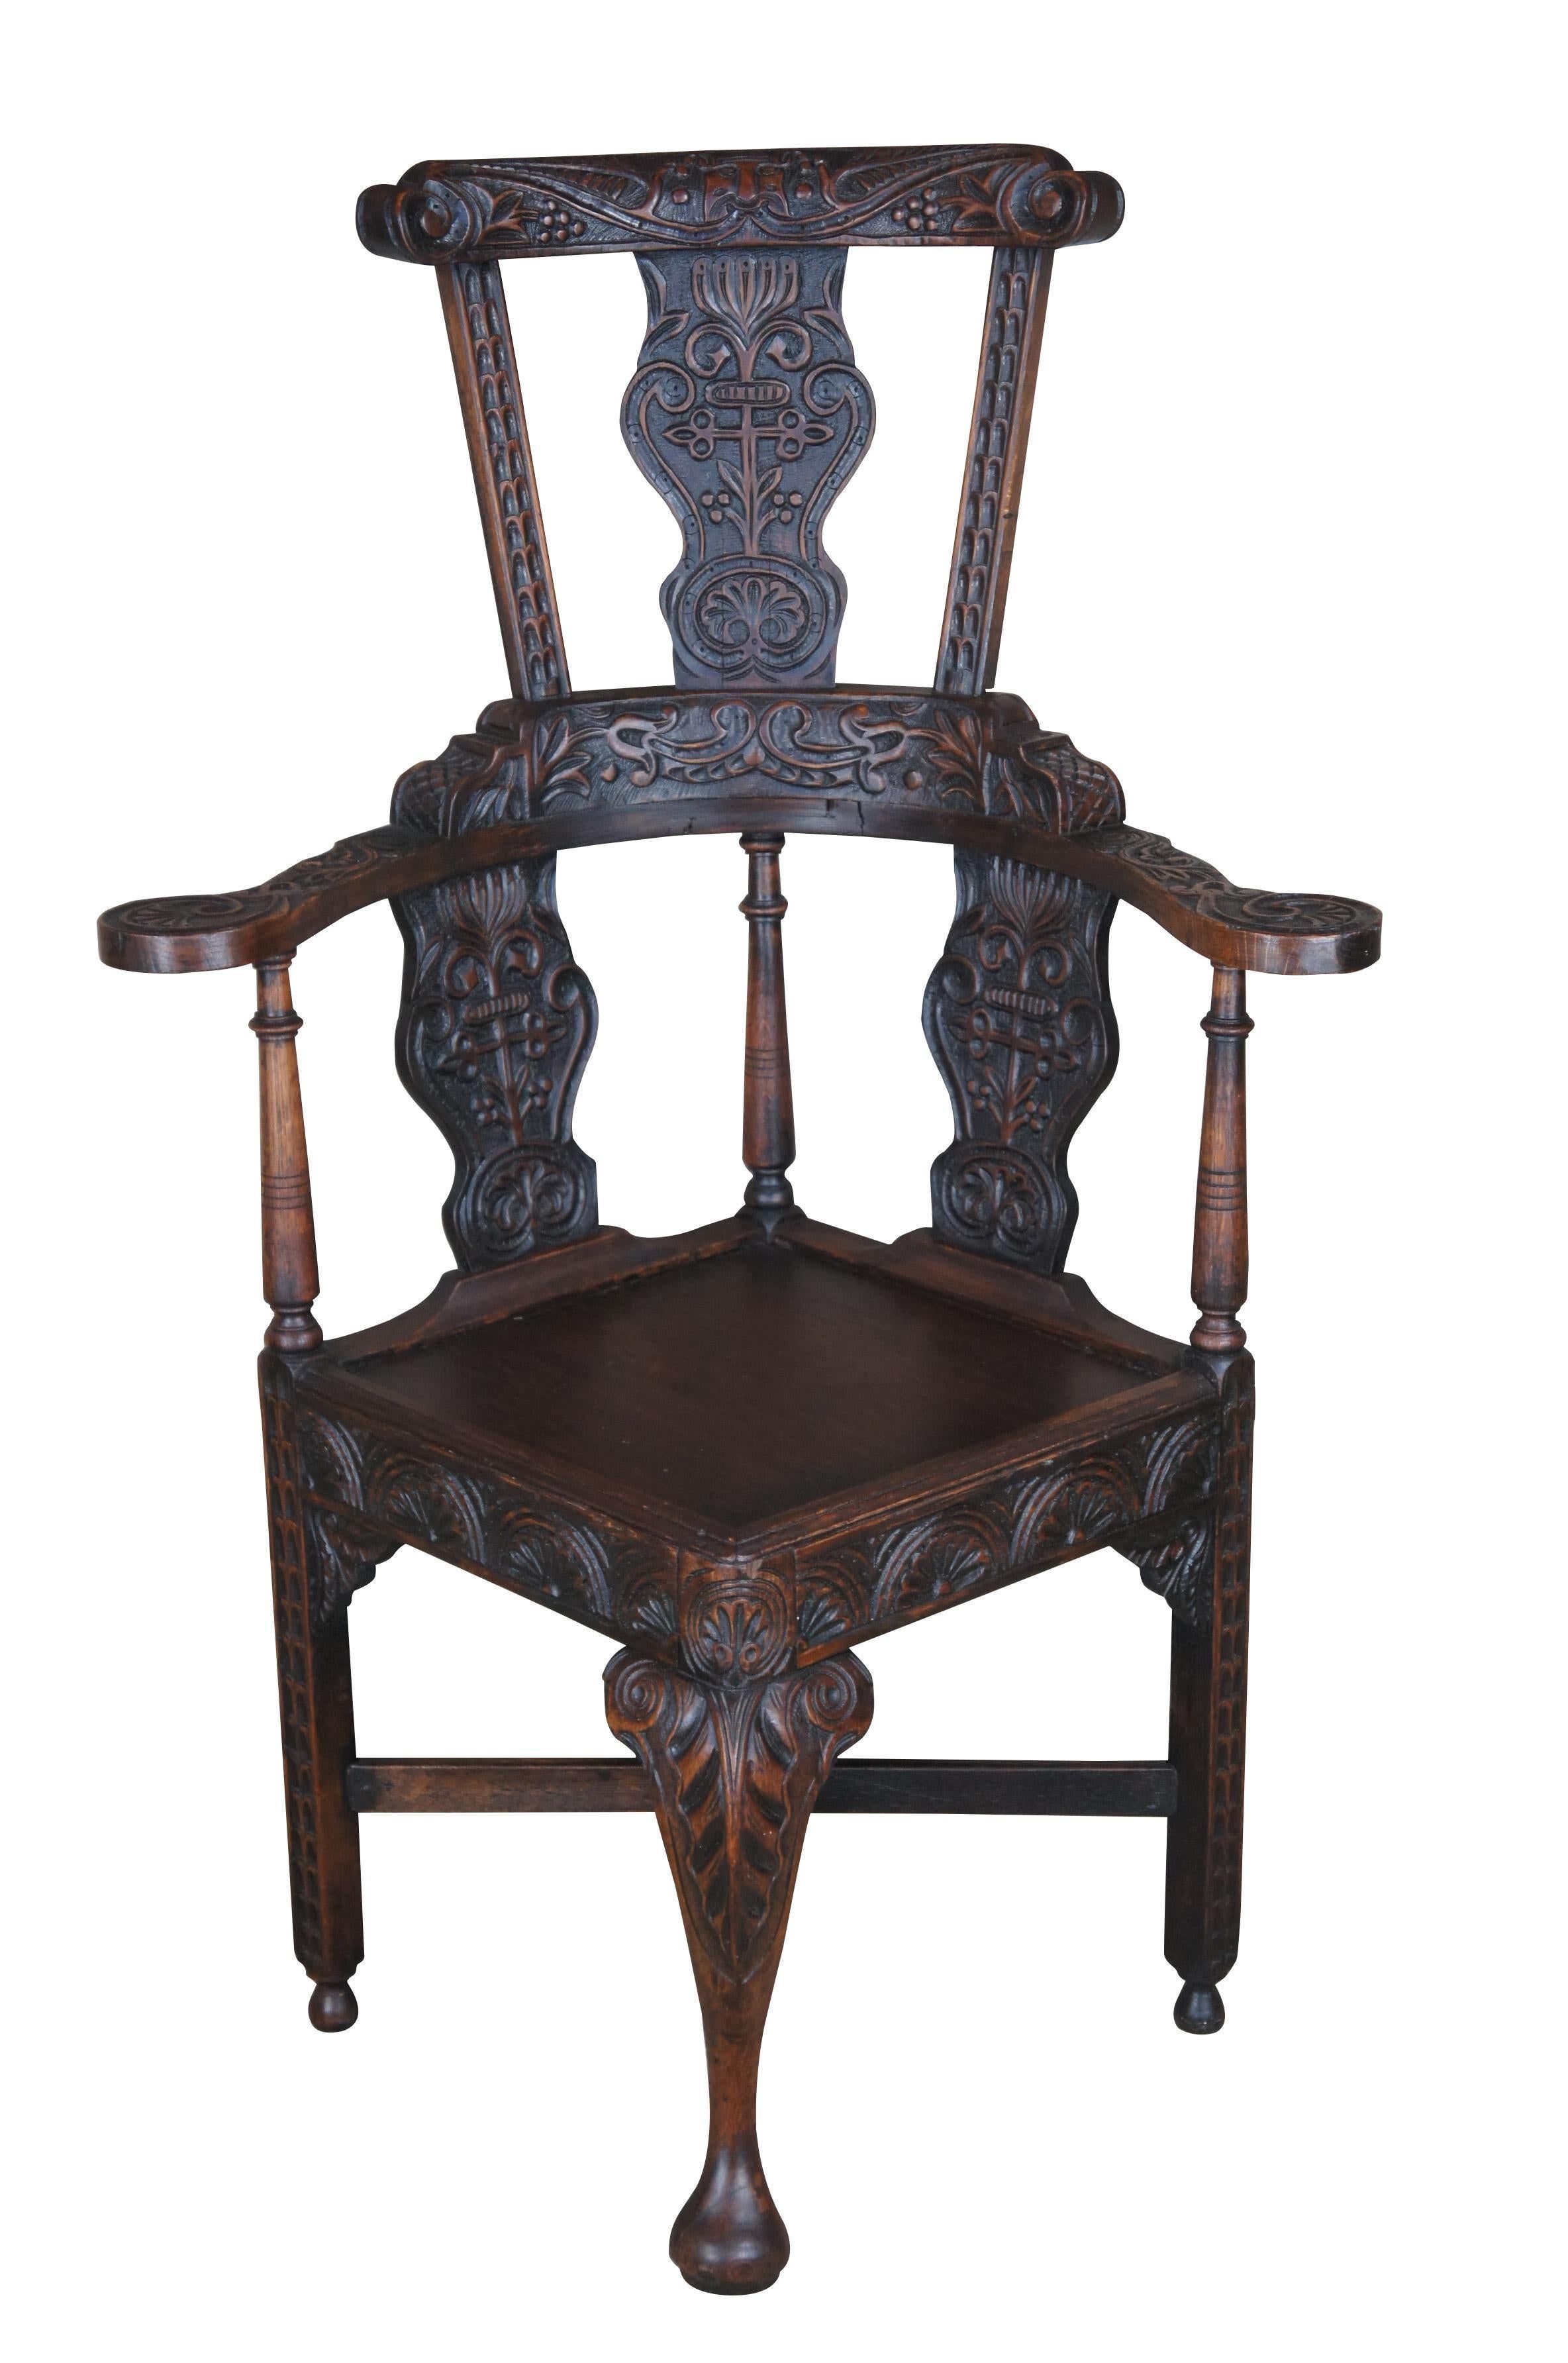 Exceedingly Rare English Yorkshire Wainscot High back corner armchair, circa 17th century.  Made of oak with an impressive hand carved back that features a whimsical figure along the crest over a foliate and berries motif, C and S scrolls, turned